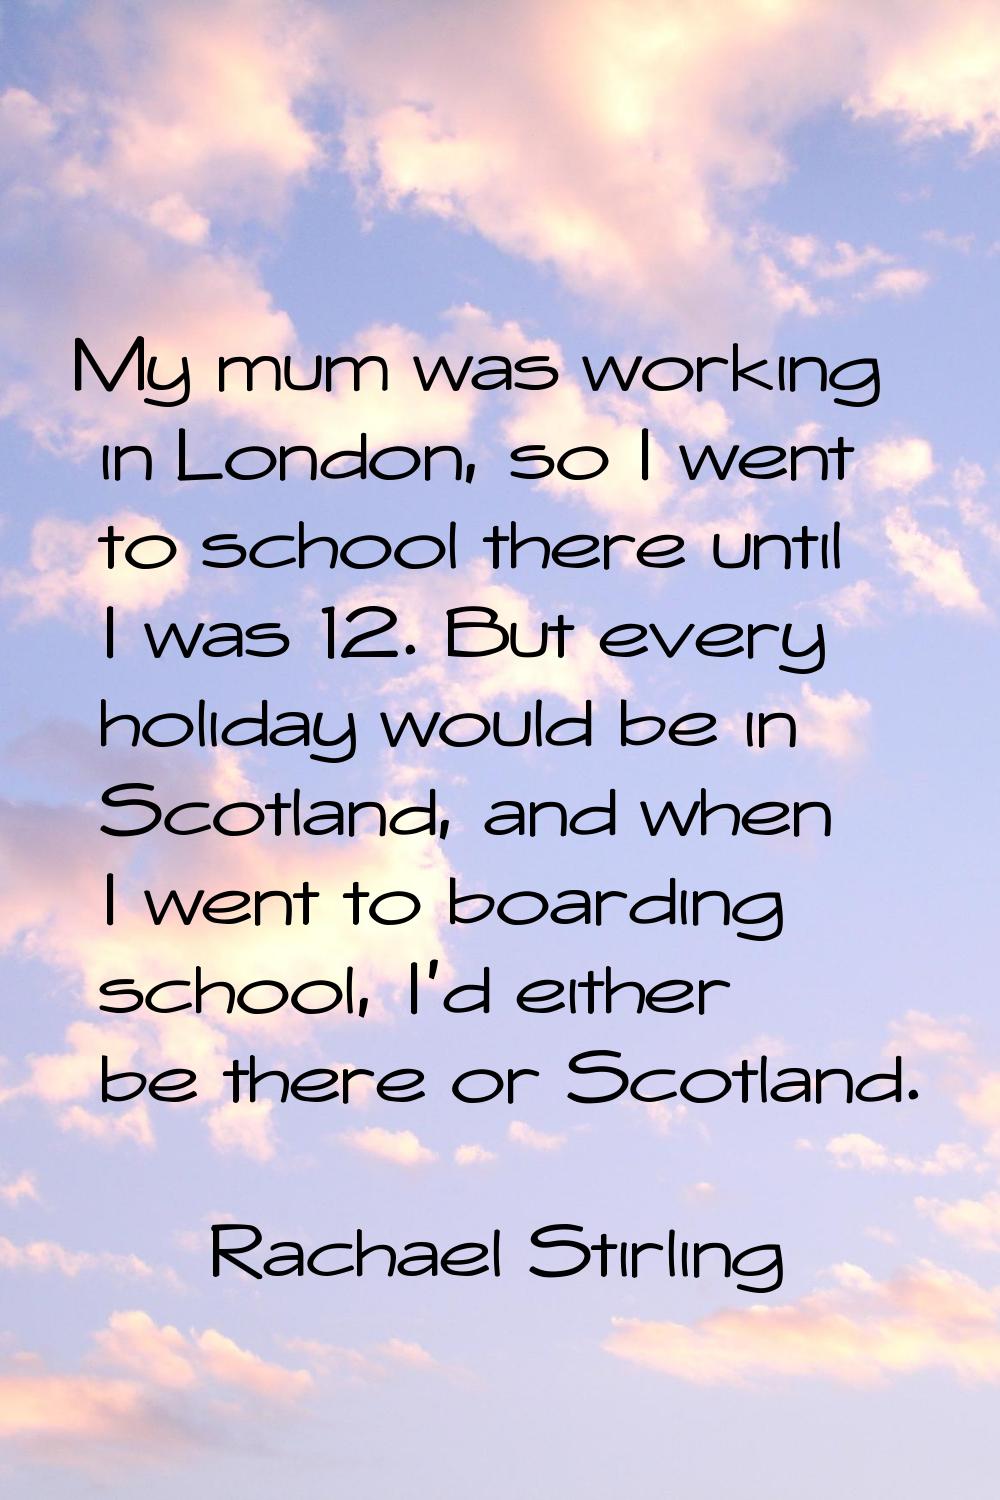 My mum was working in London, so I went to school there until I was 12. But every holiday would be 